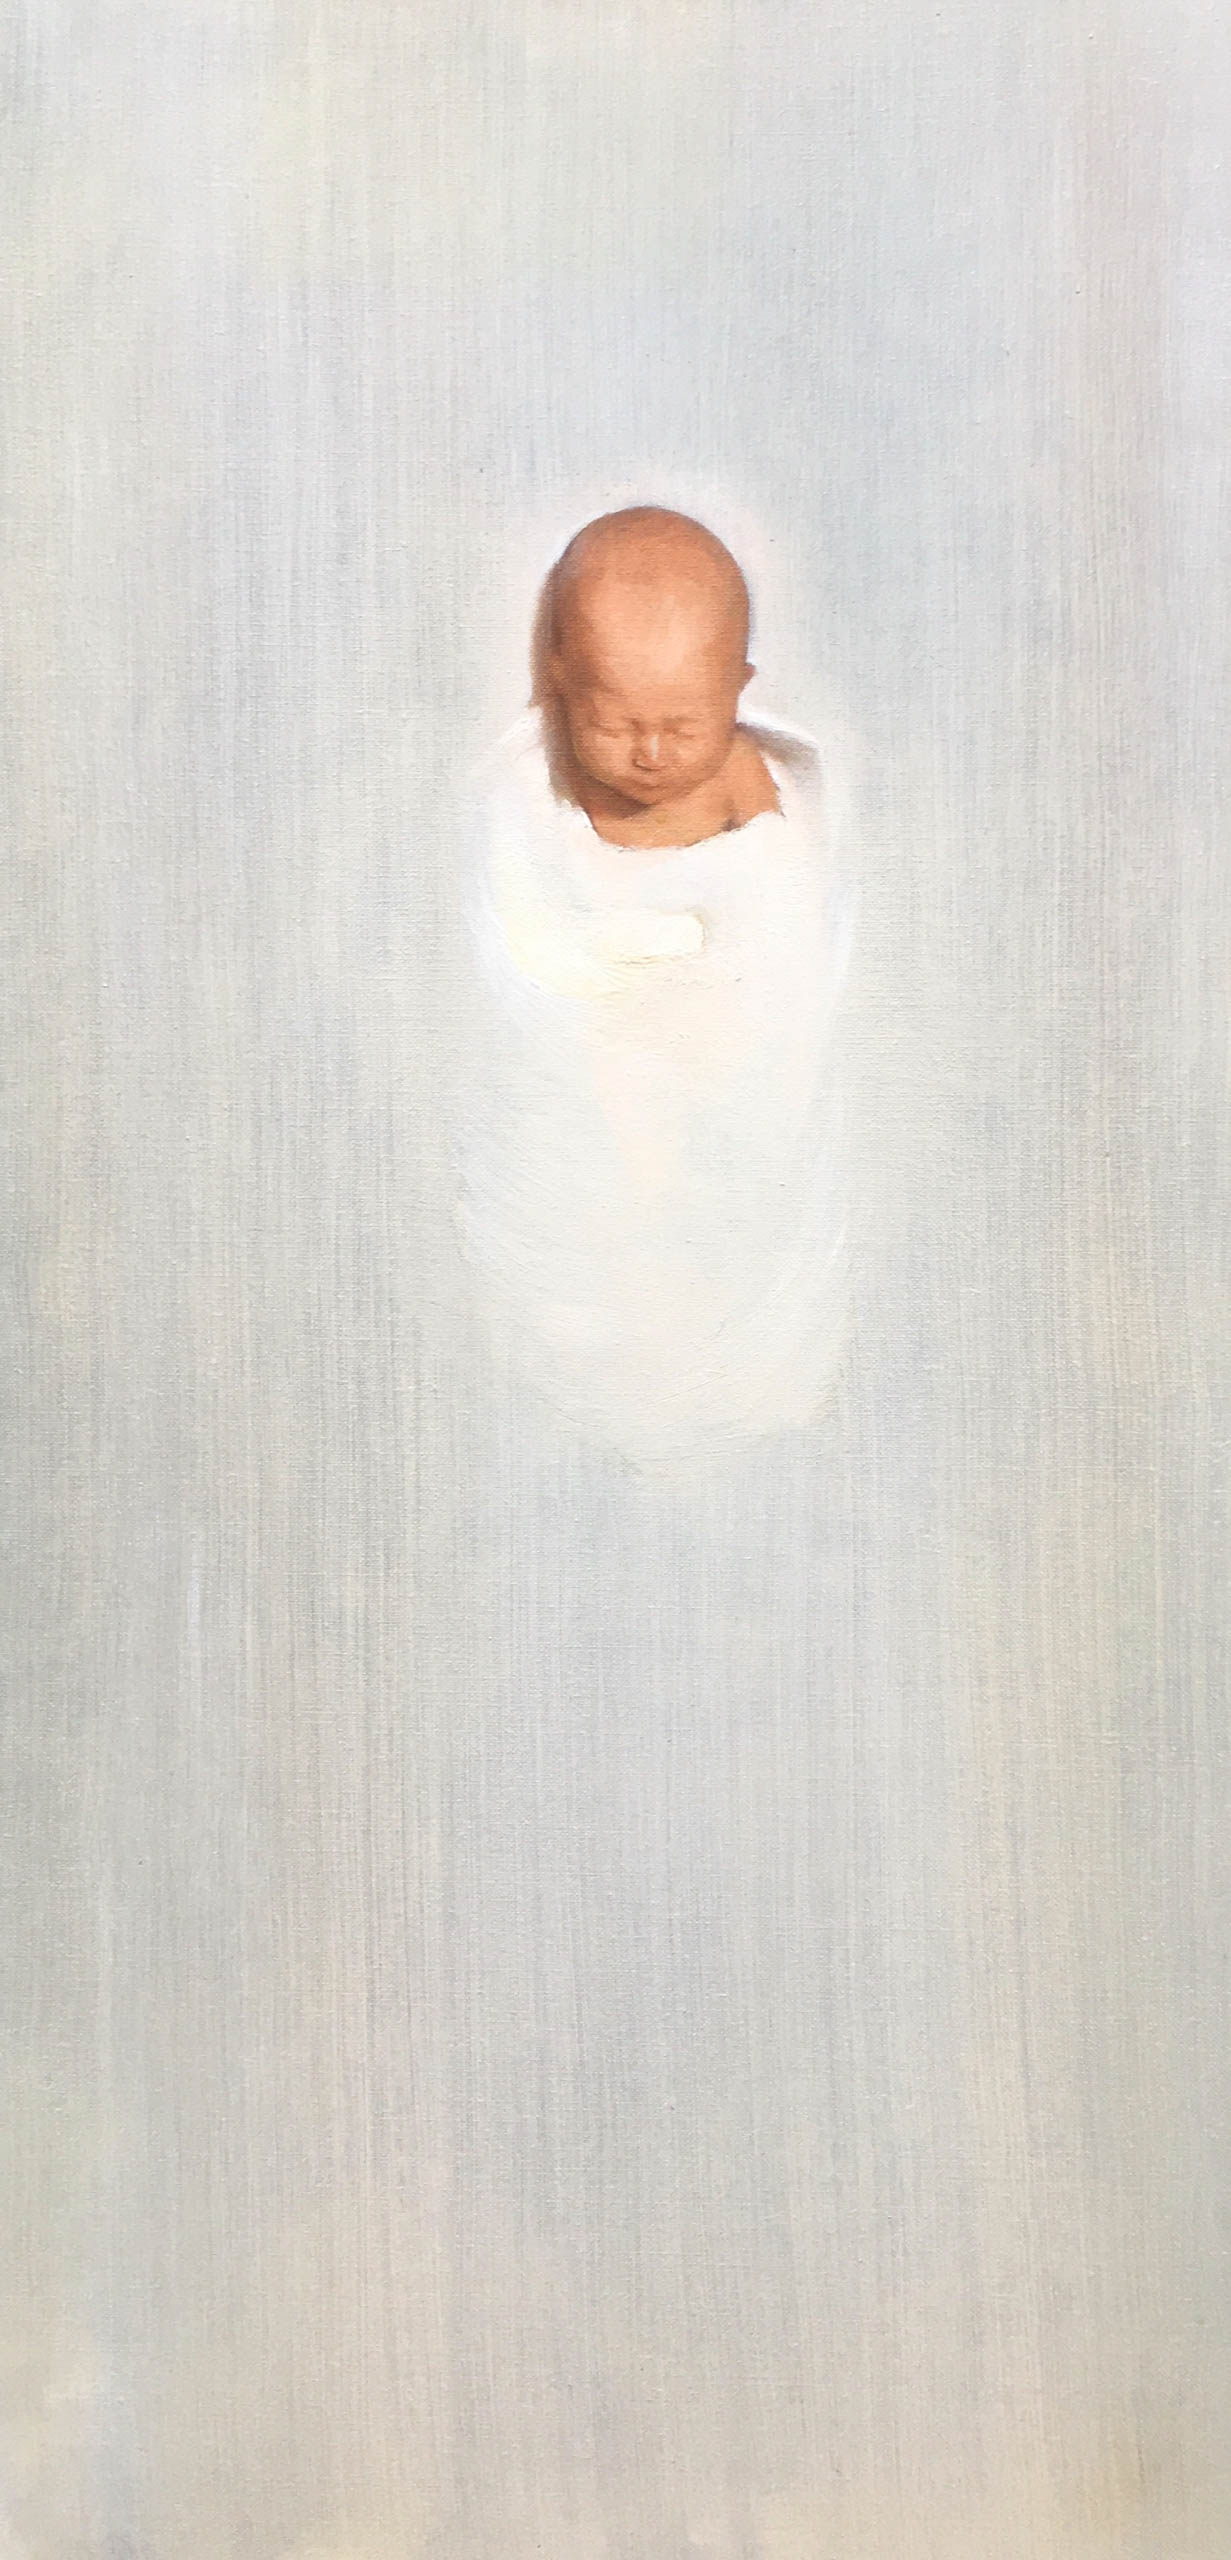 Jessica Roderick, New, Oil on canvas, 44 x 21.5 in, 2019